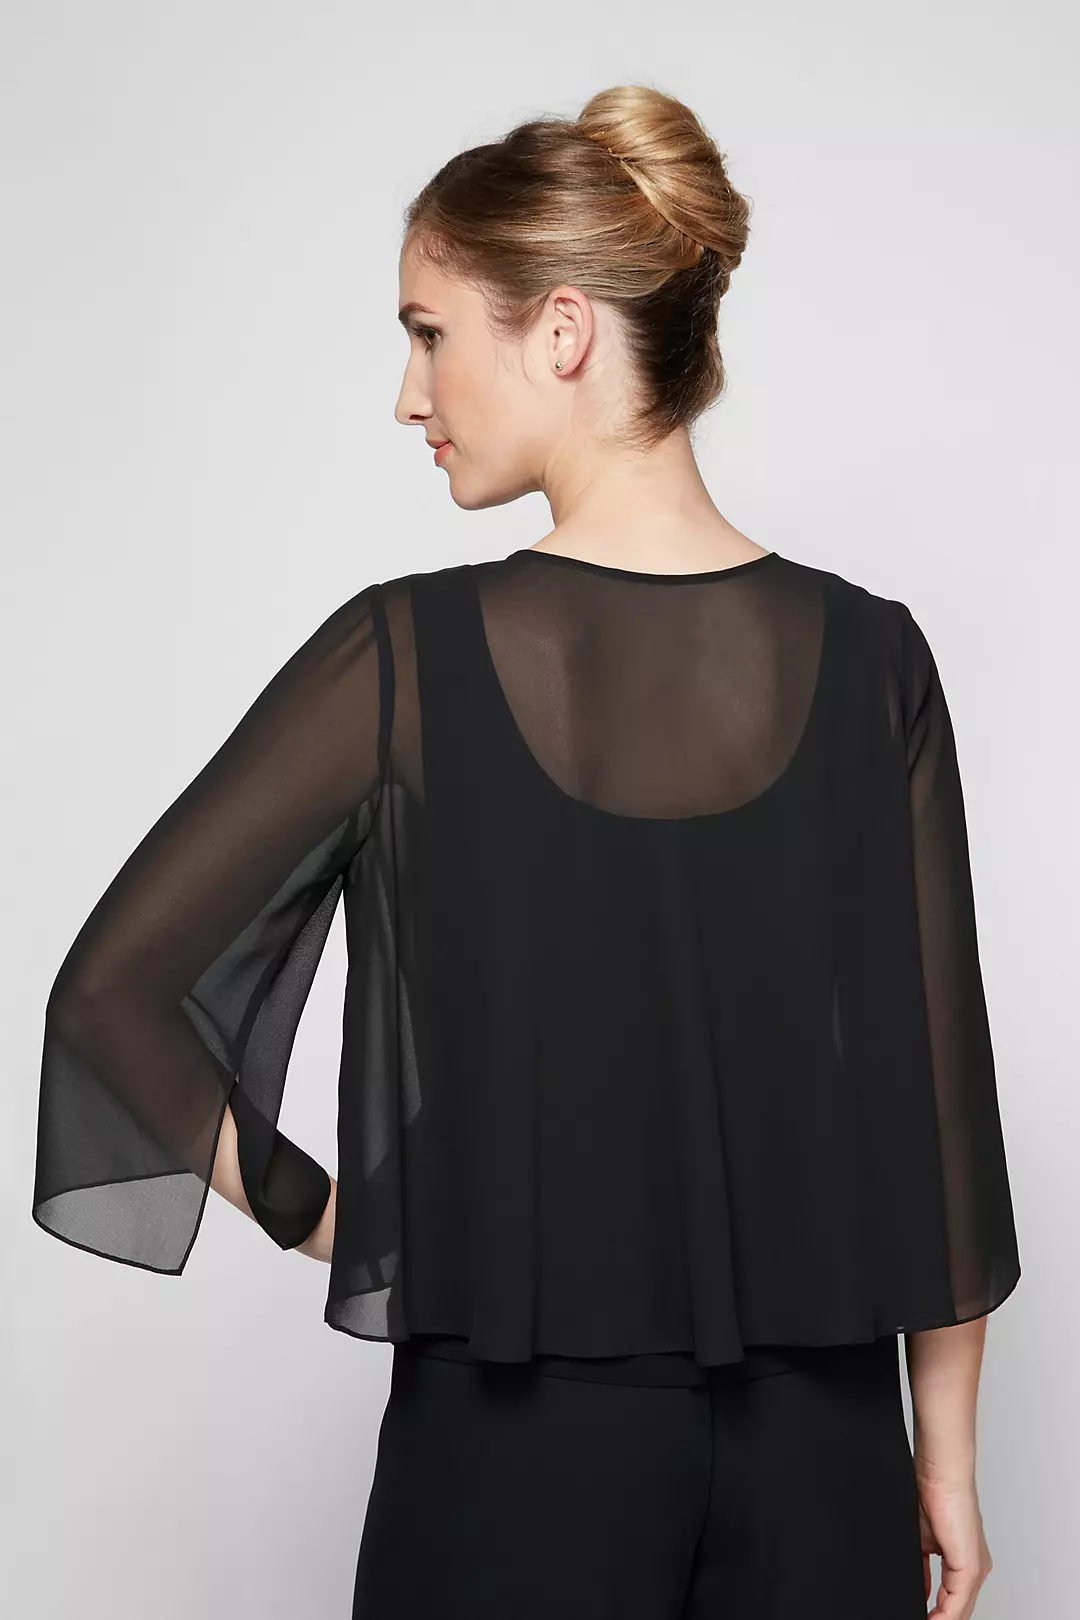 High-Low Chiffon Cover Up with Split Sleeves Image 2